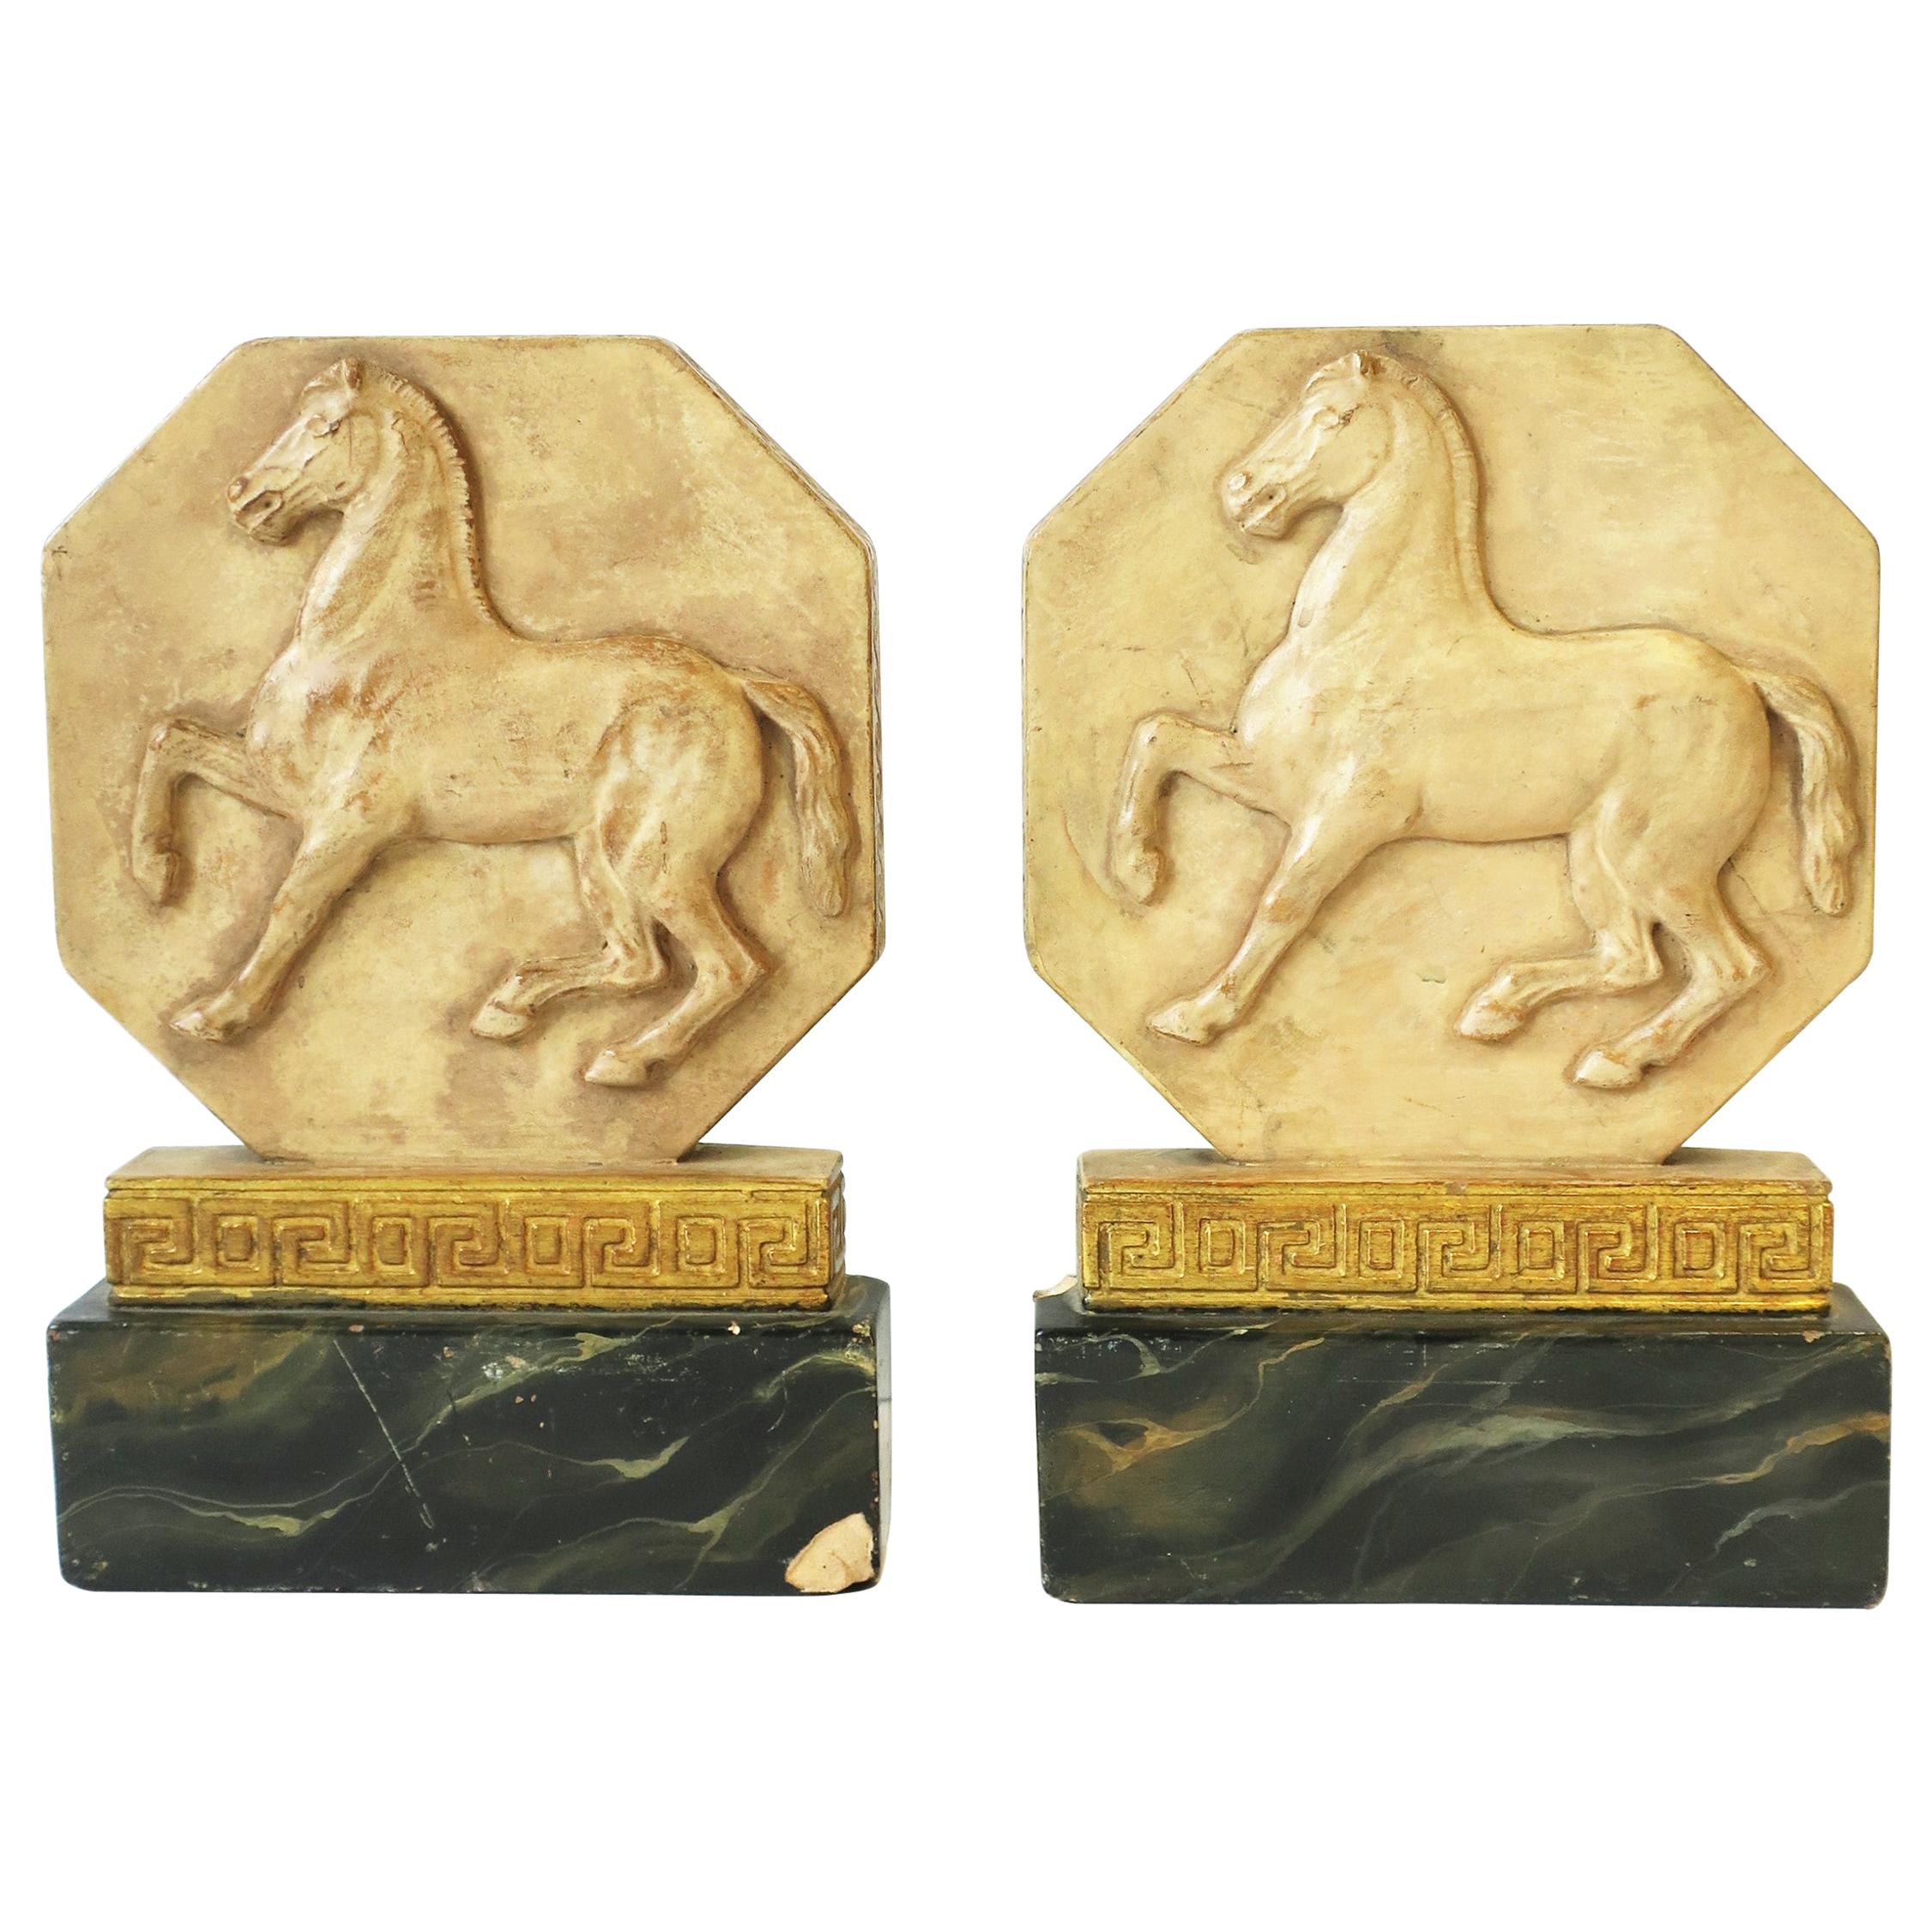 Italian Regency Bookends with Horse and Gold Greek-Key Design, Pair